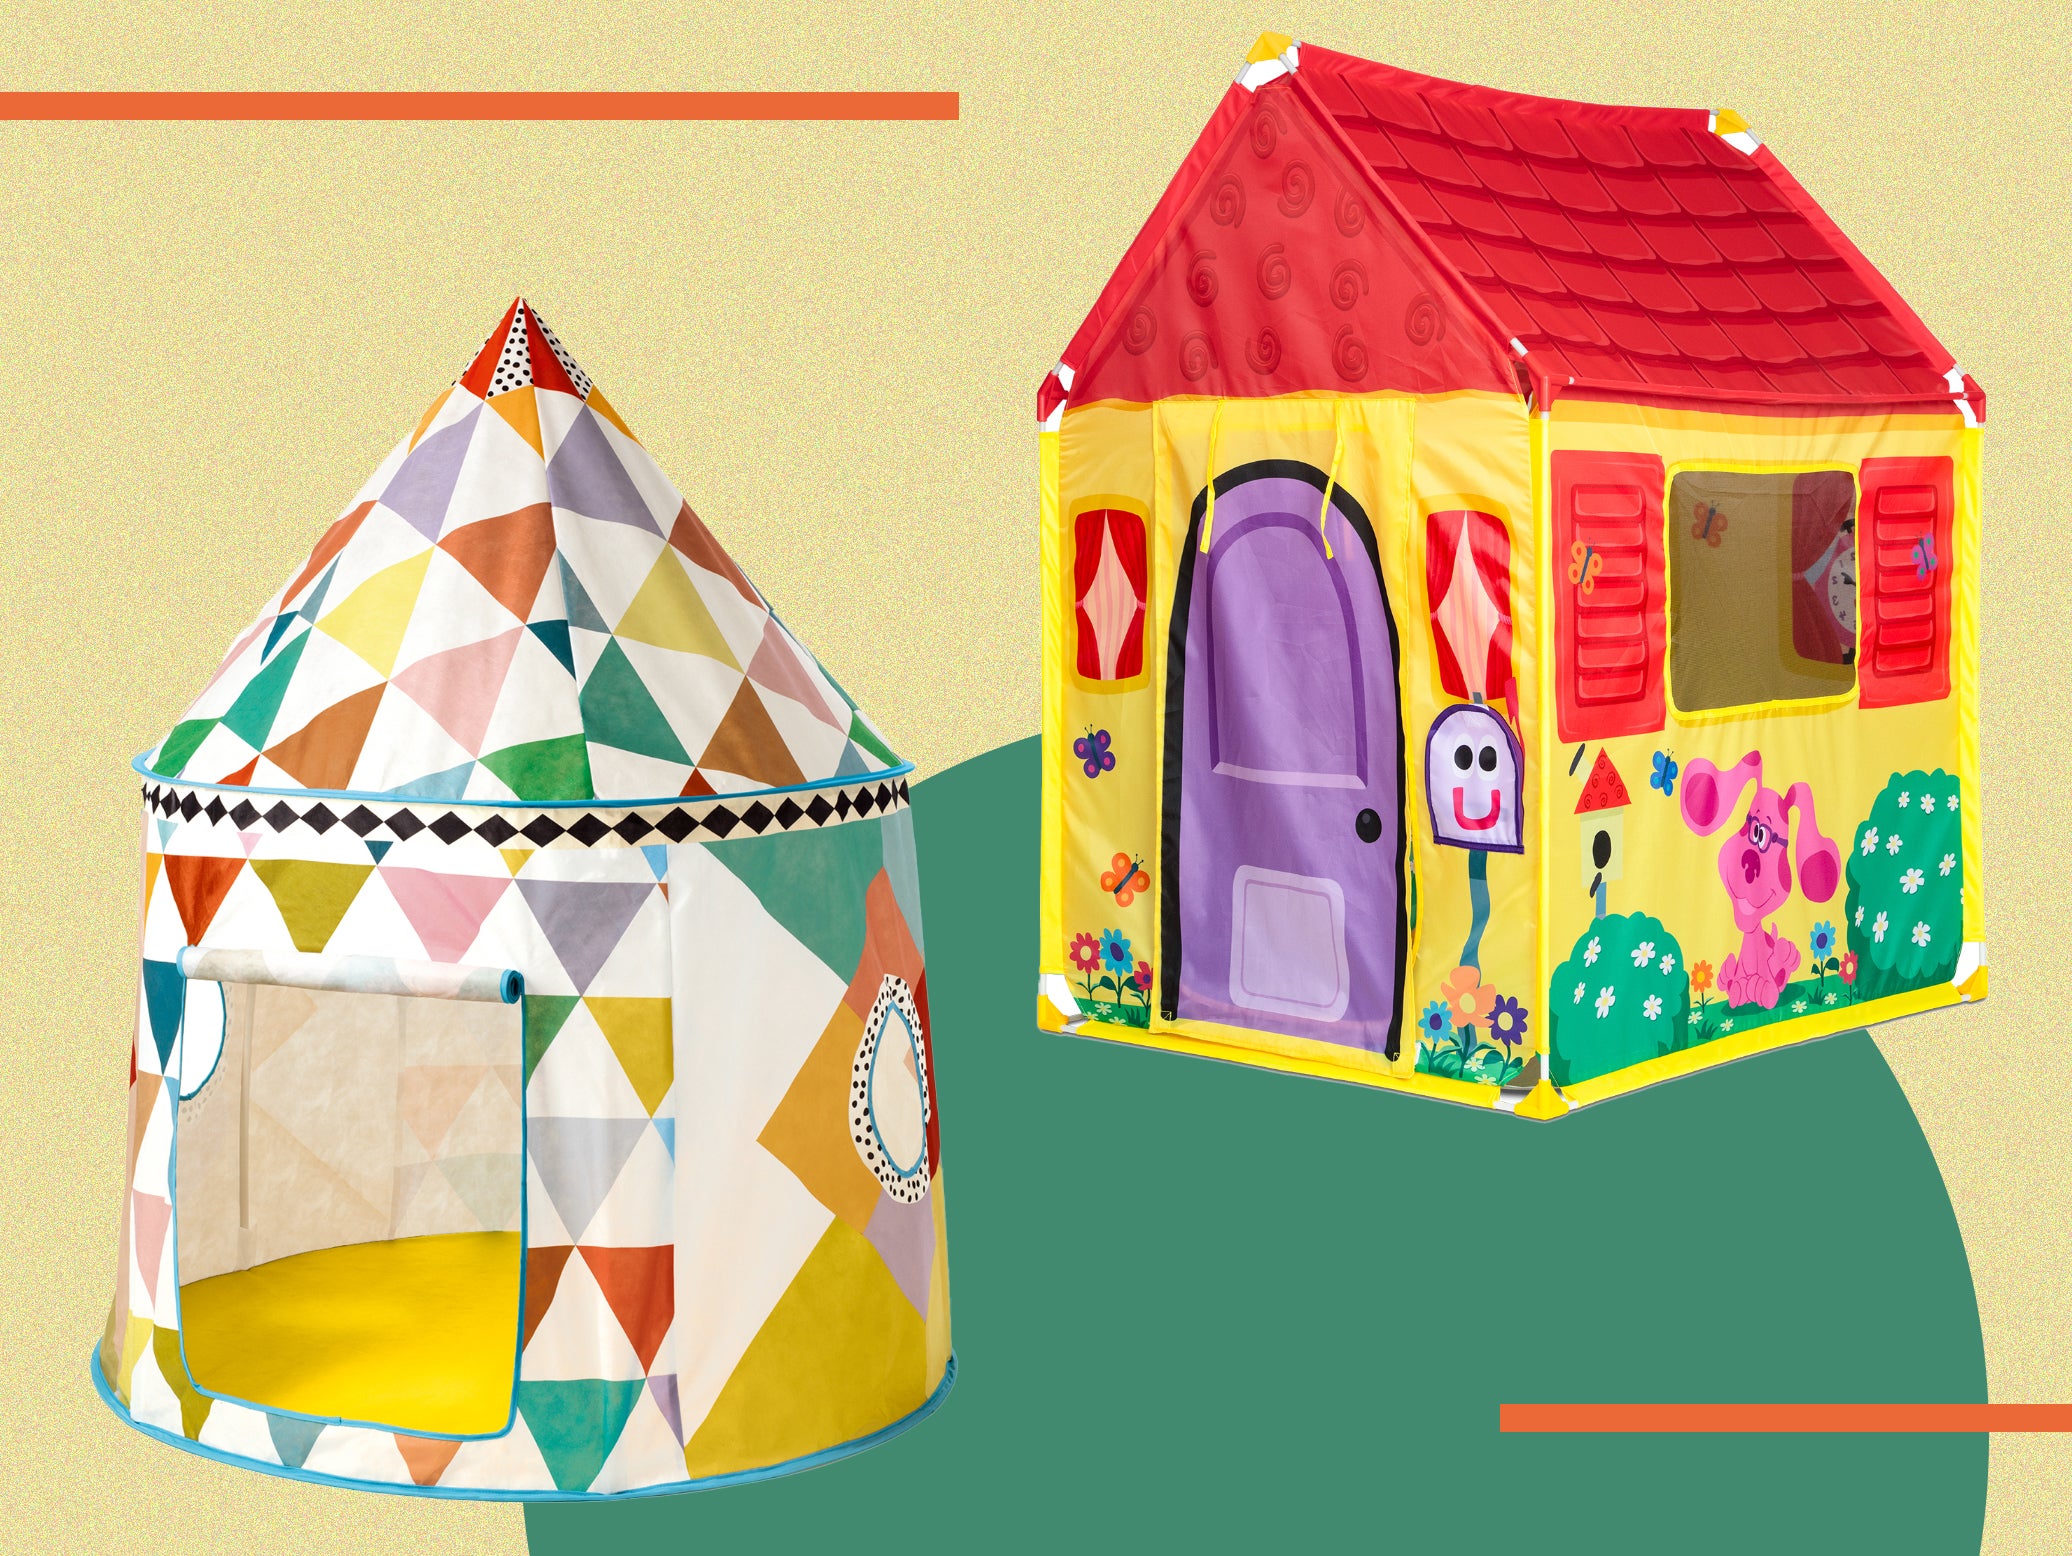 CANOPY SEWING PATTERN Kids Girls Boys Pretend Play Bedroom Decor l Homemade Handmade Gift Idea 5827 Sew Playhouse Play House Tent Fort